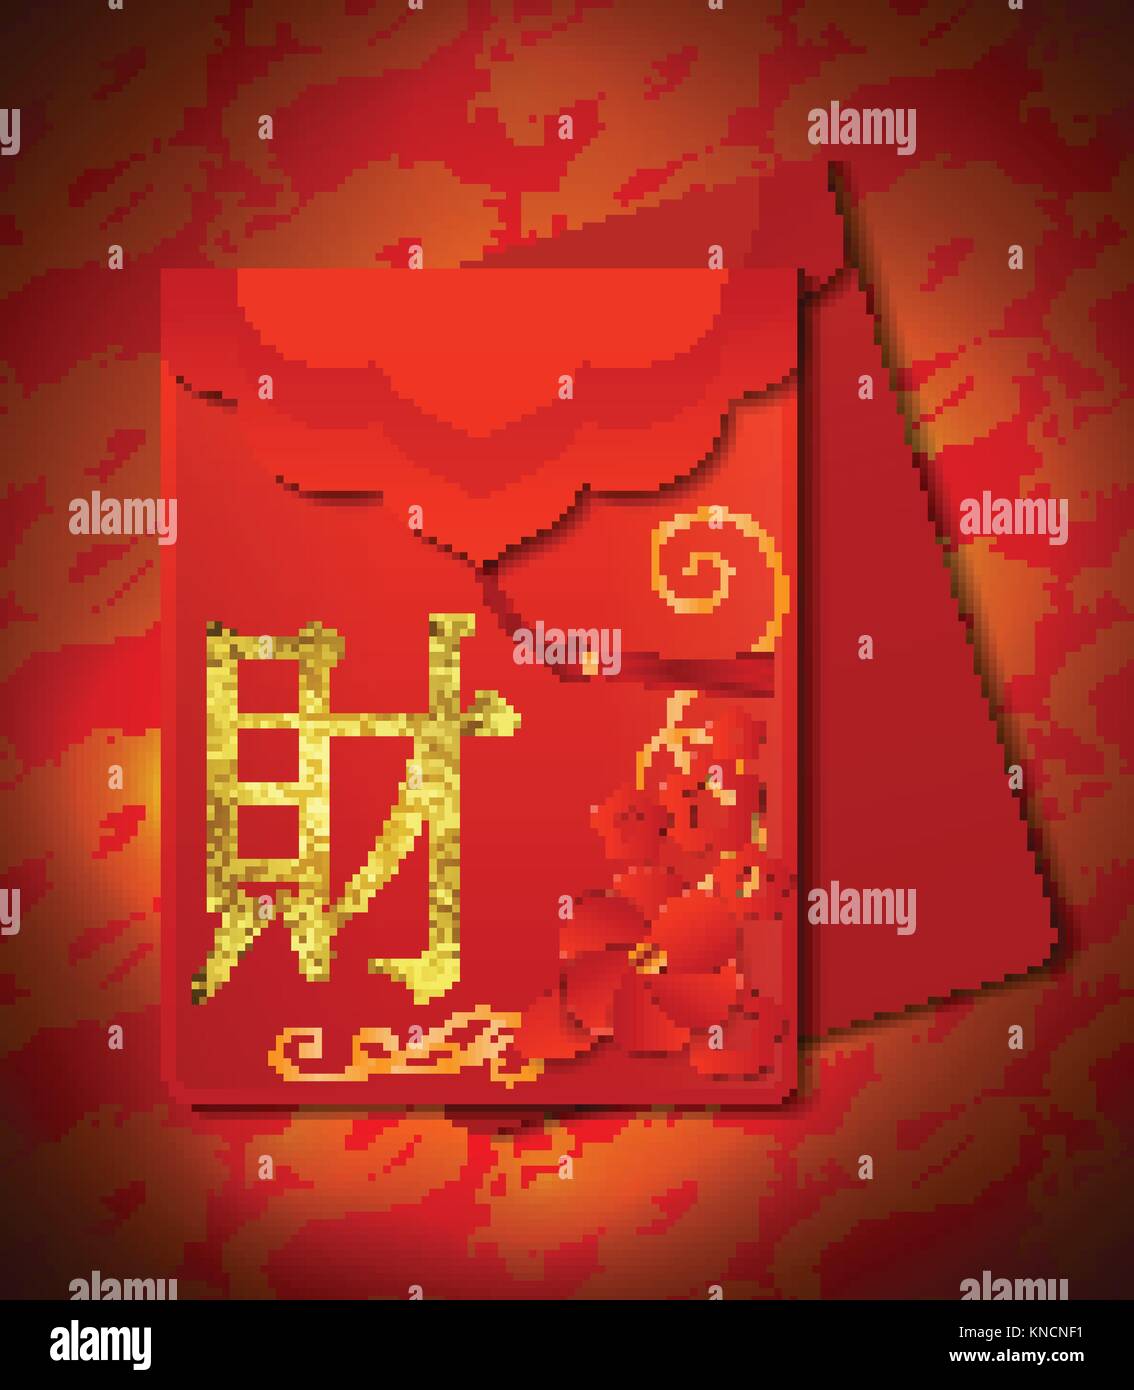 Chinese red envelopes Stock Vector Images - Page 2 - Alamy